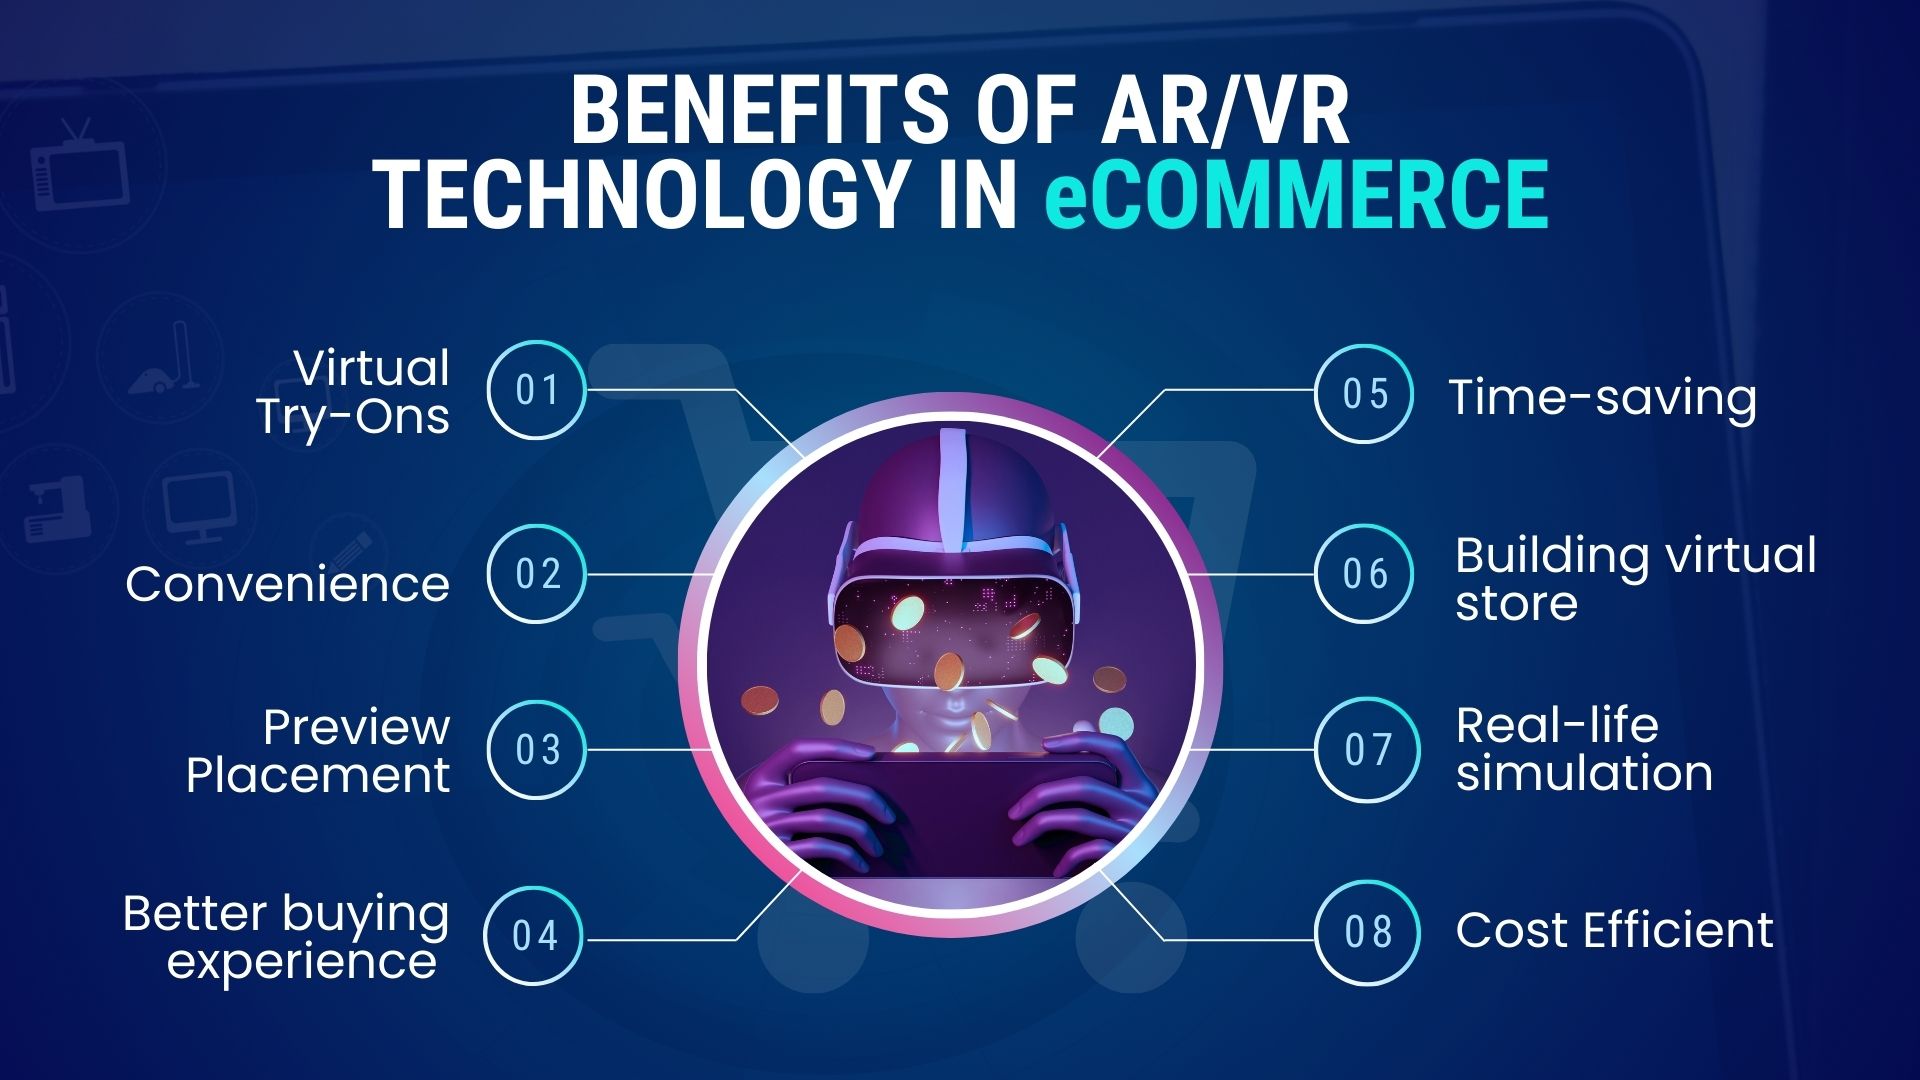 Benefits of AR/VR Technology in eCommerce